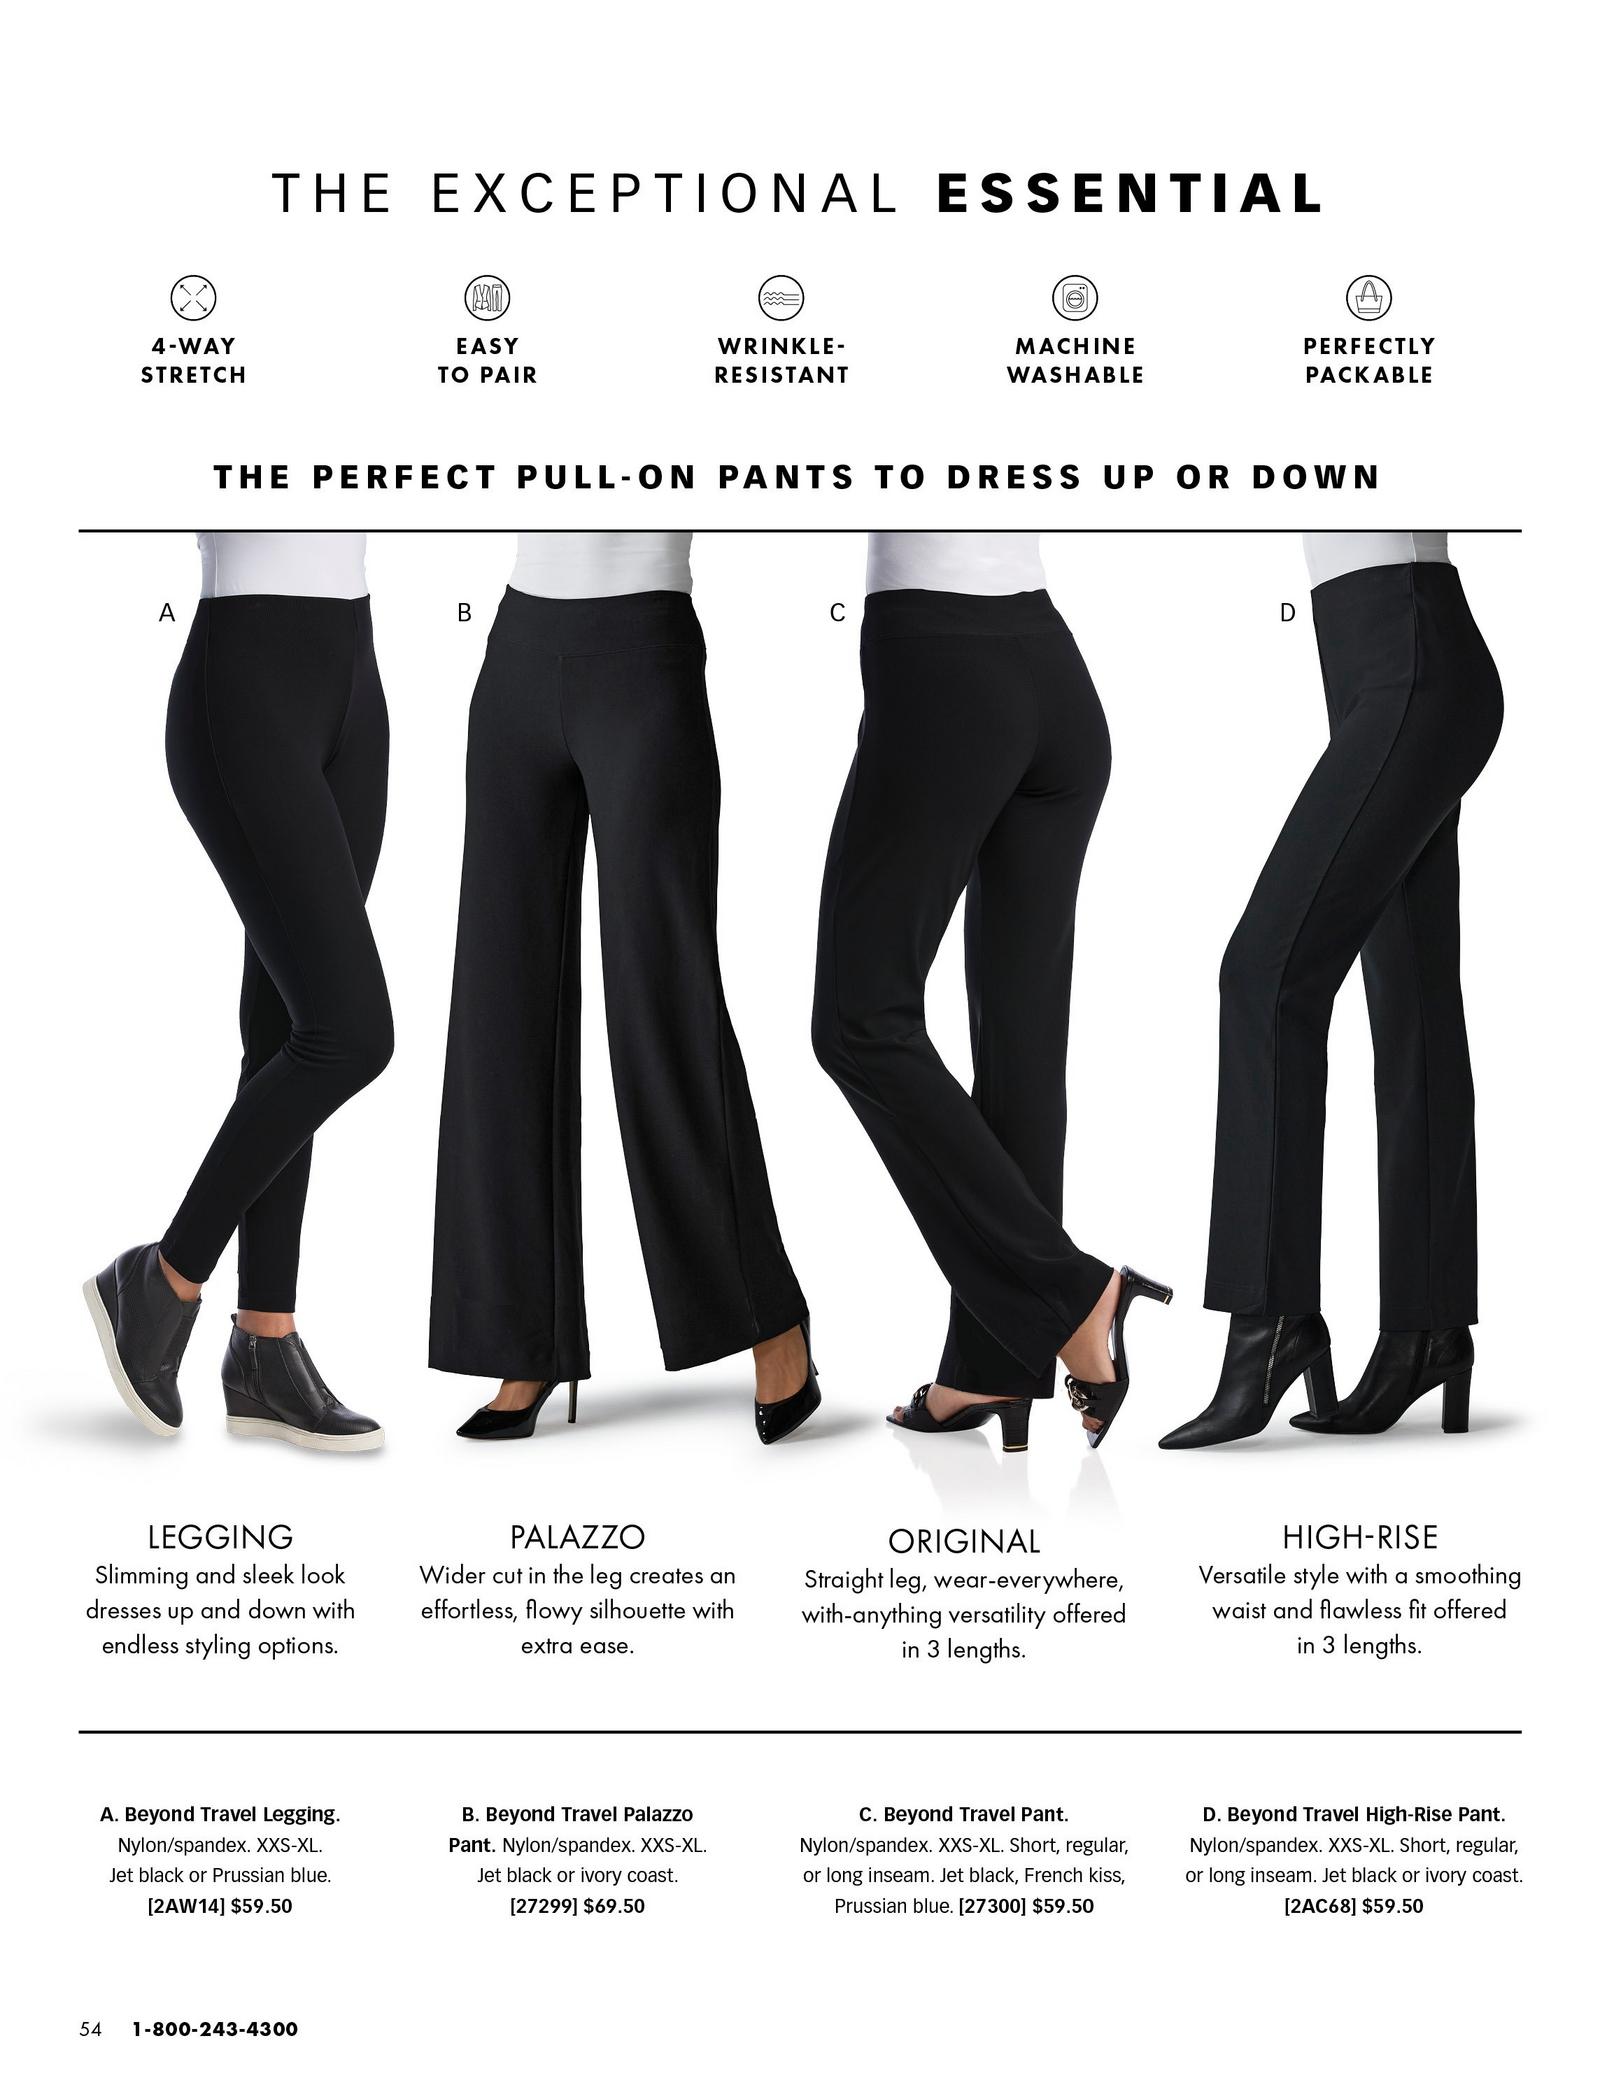 from left to right: black leggings, black palazzo pants, black straight-leg pants, and high-waisted straight-leg pants.